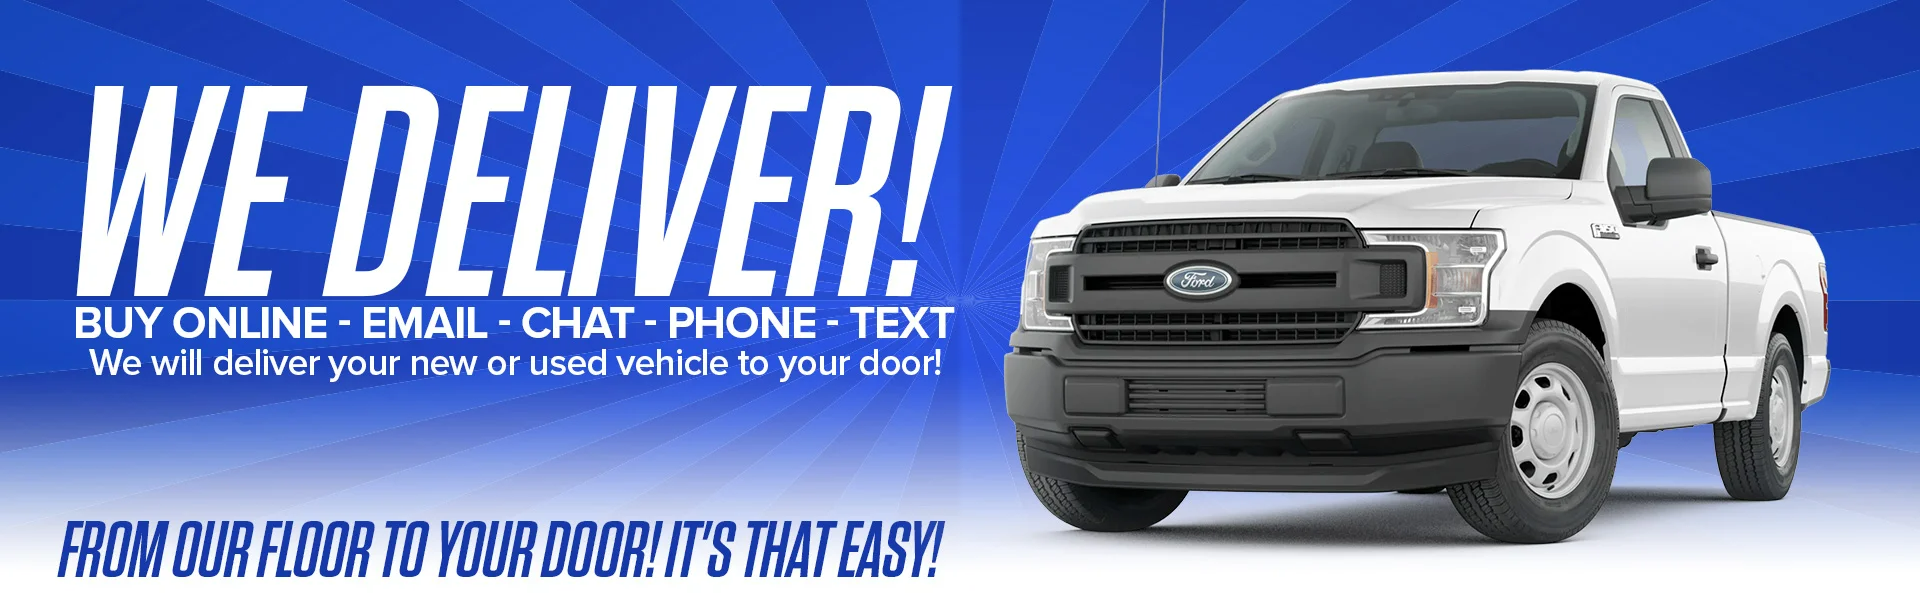 We will deliver your new or used vehicle to your door!